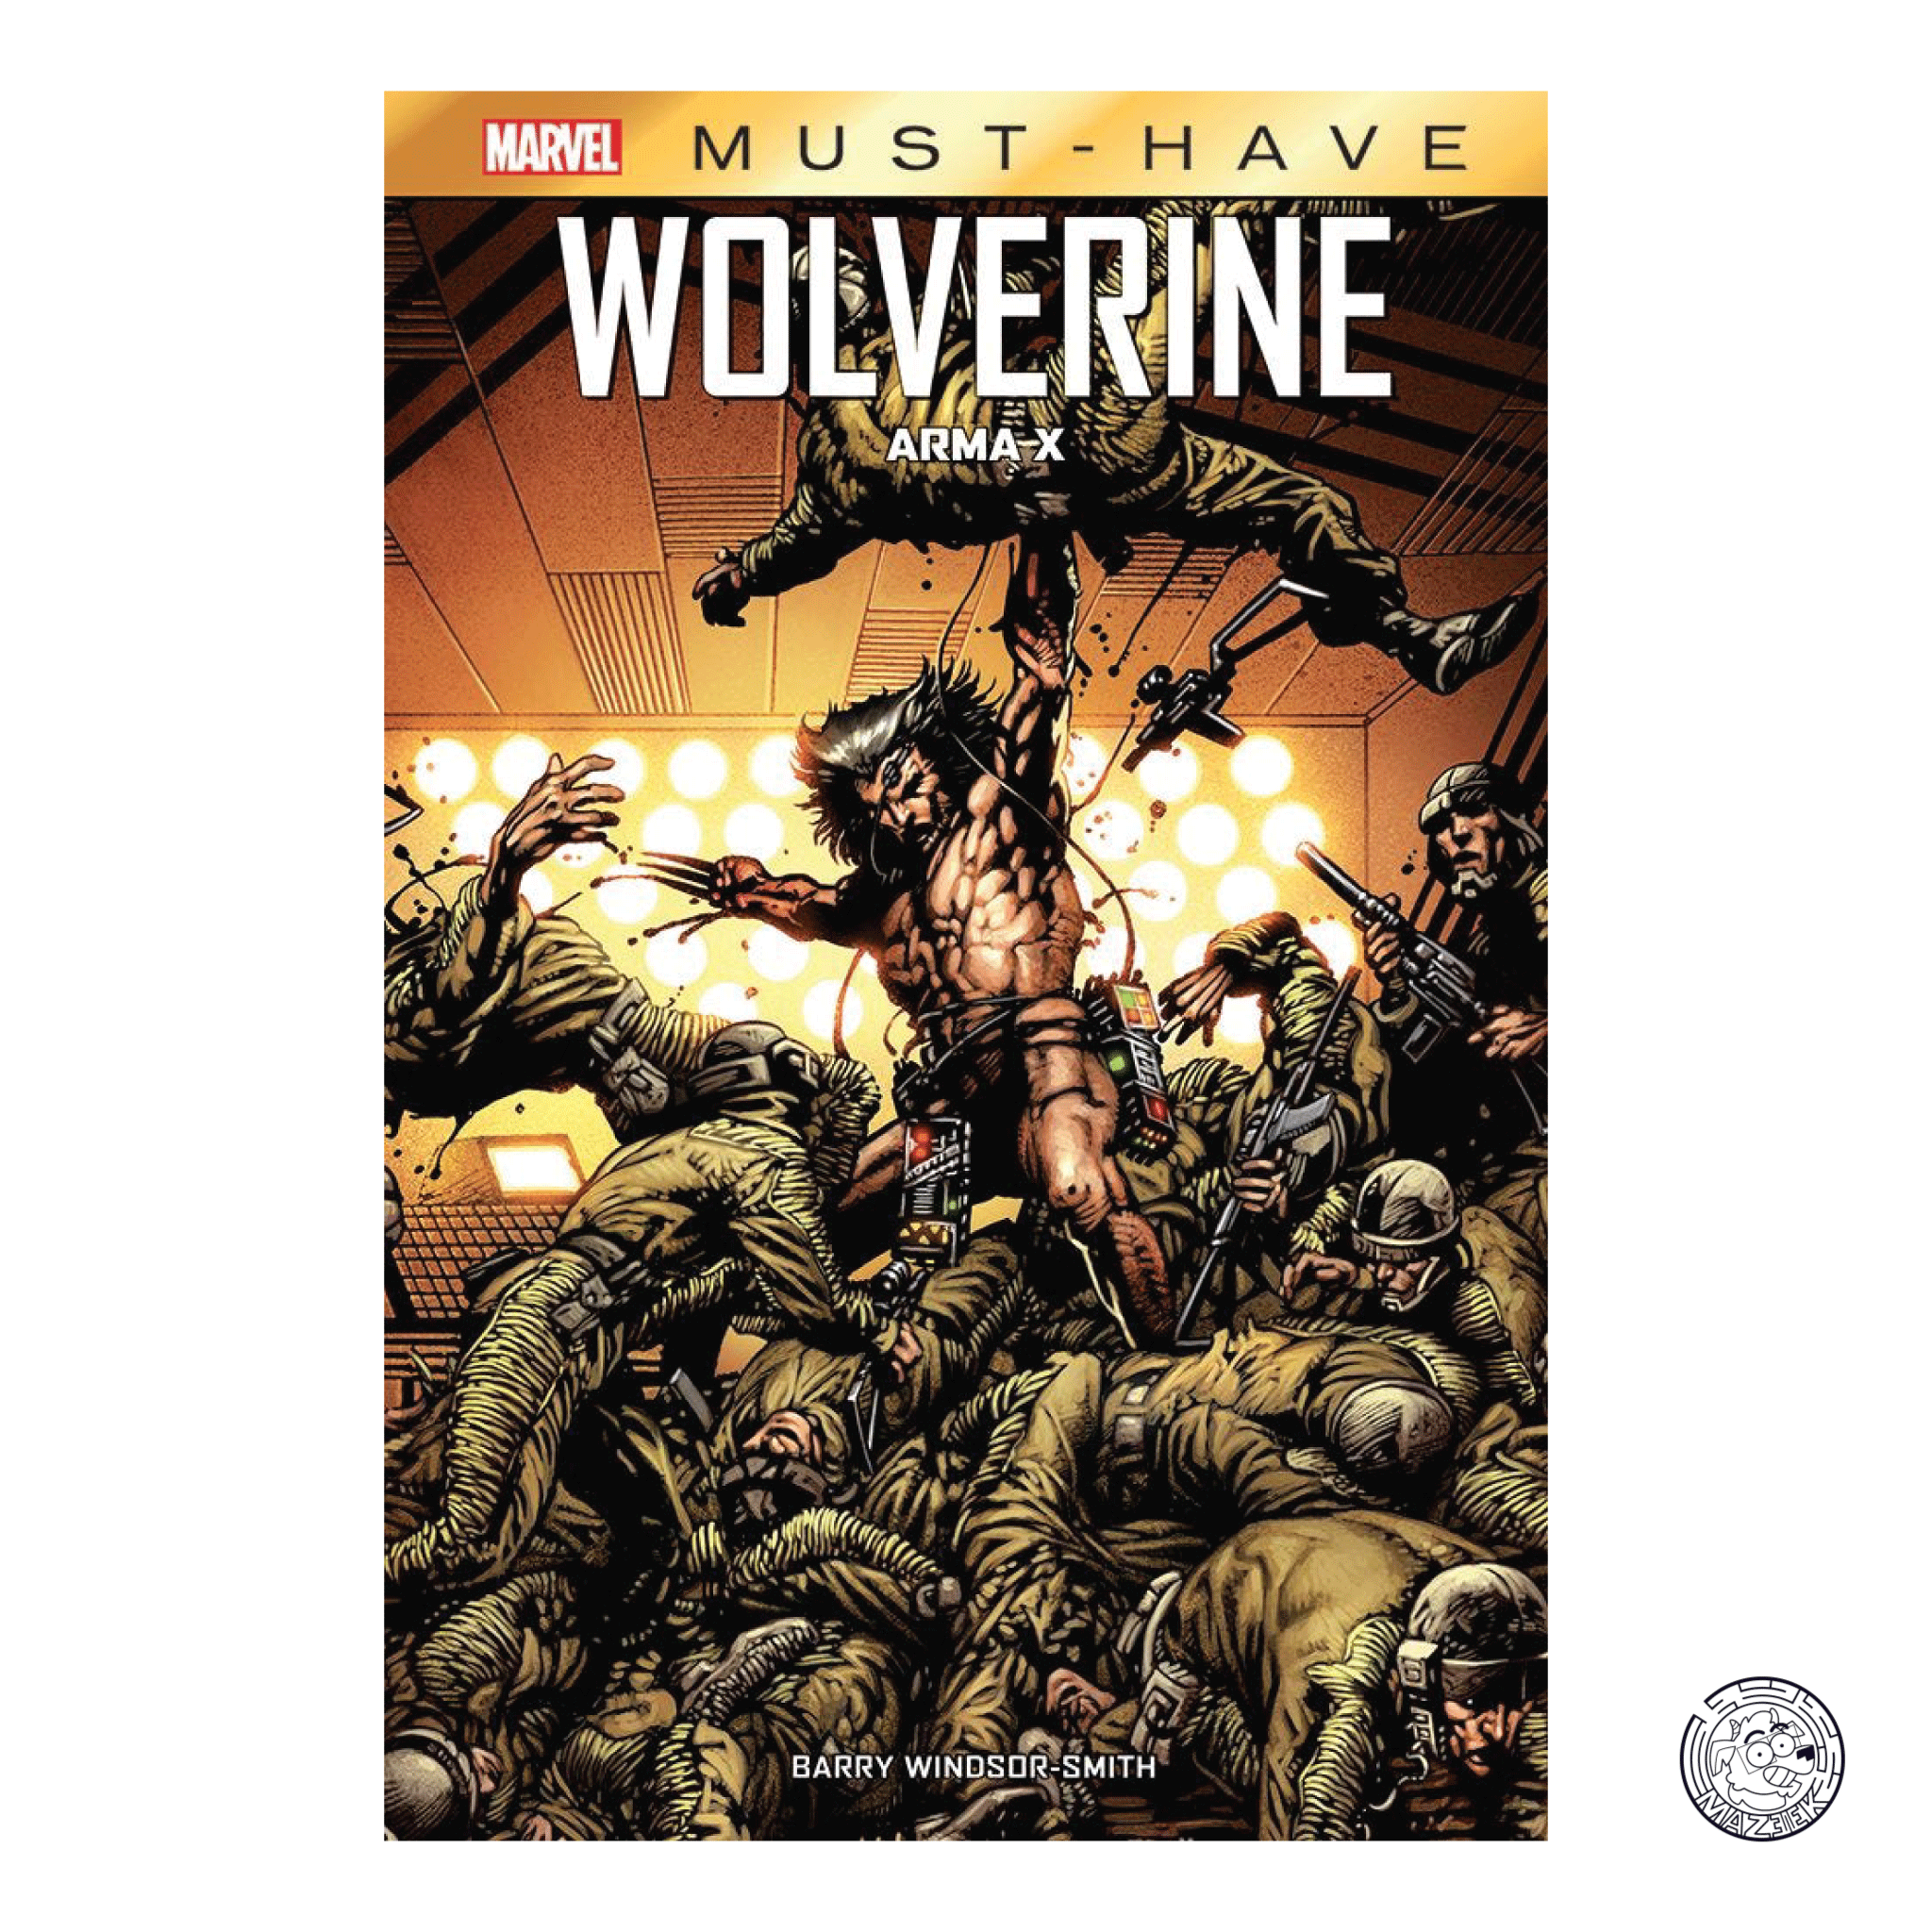 Marvel Must Have - Wolverine: Weapon X